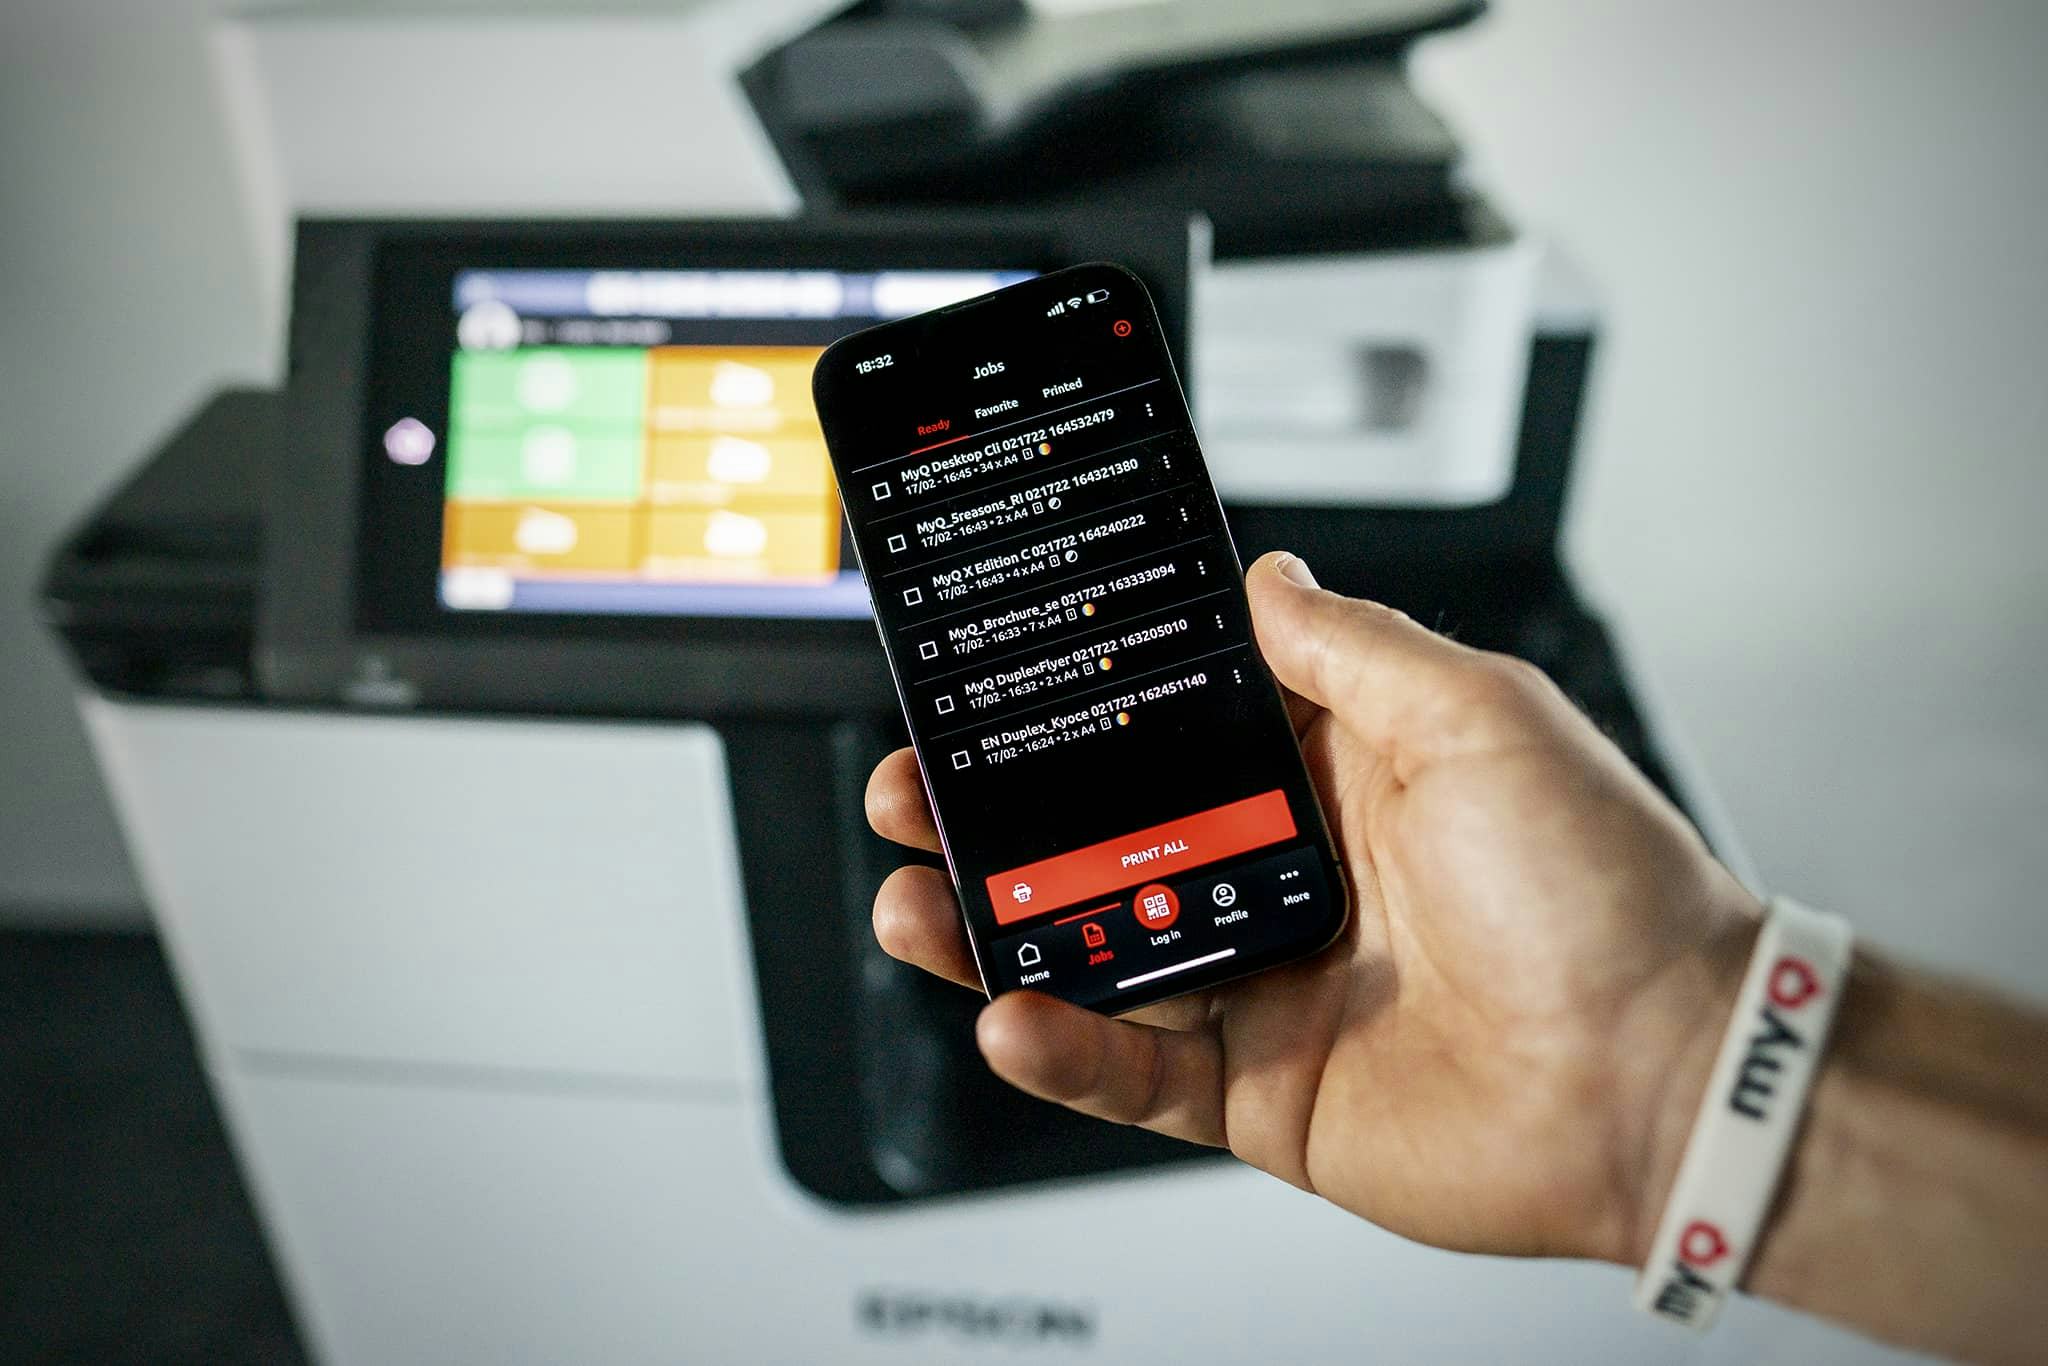 MyQ X Software - Users manage their print jobs from their mobile phone or tablet with the MyQ X Mobile Client application (iOS and Android).